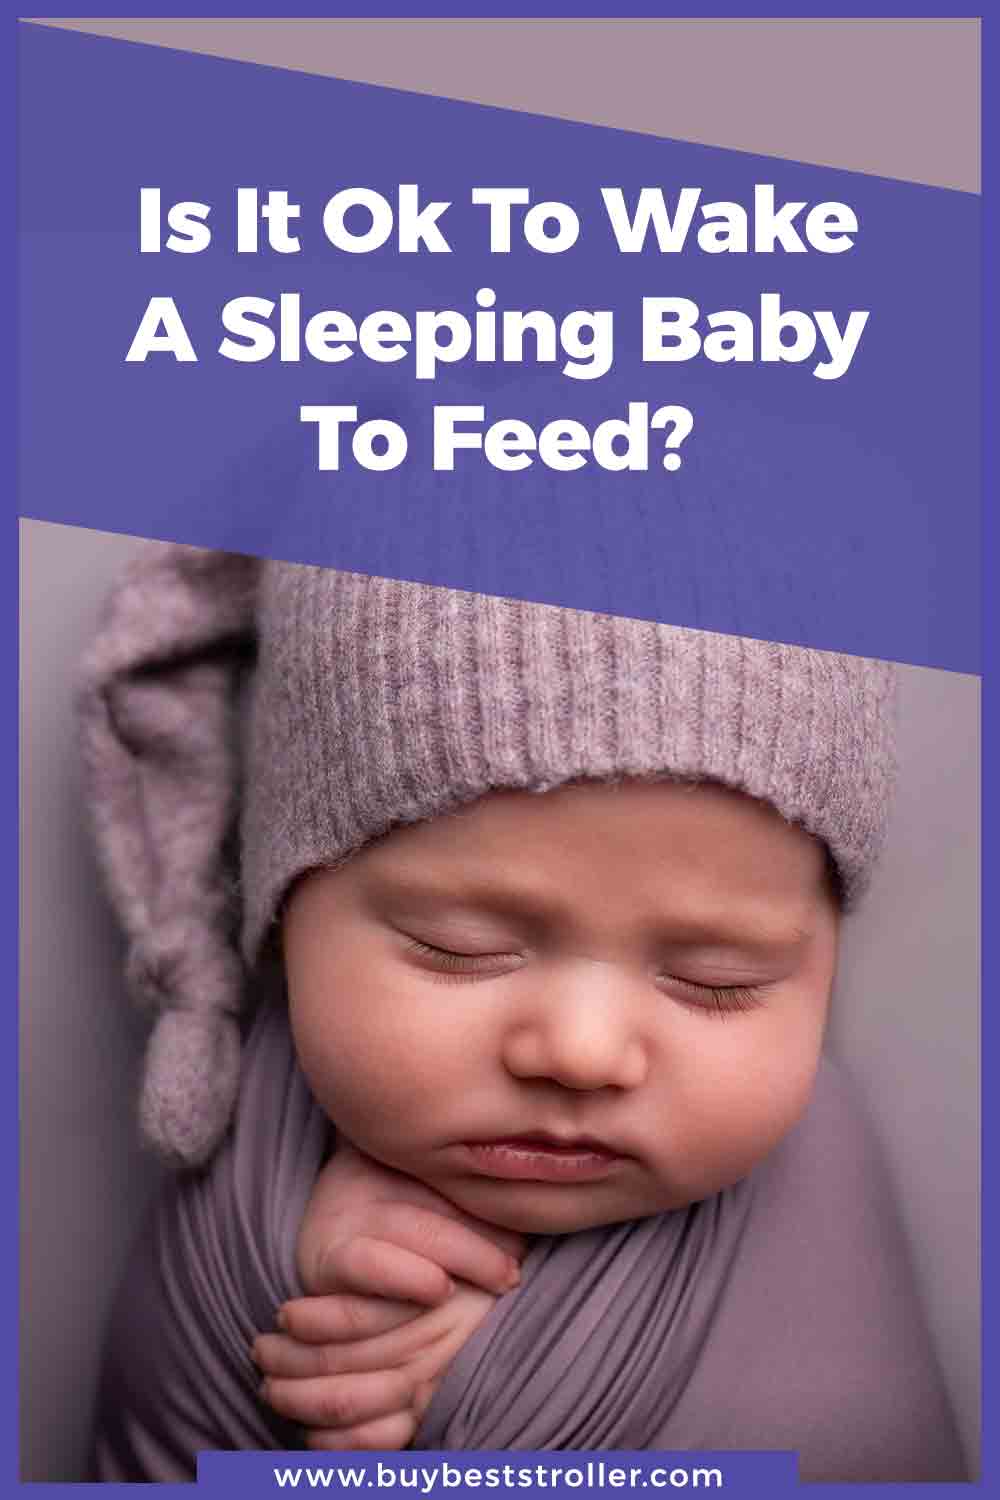 Is It Ok To Wake A Sleeping Baby To Feed?